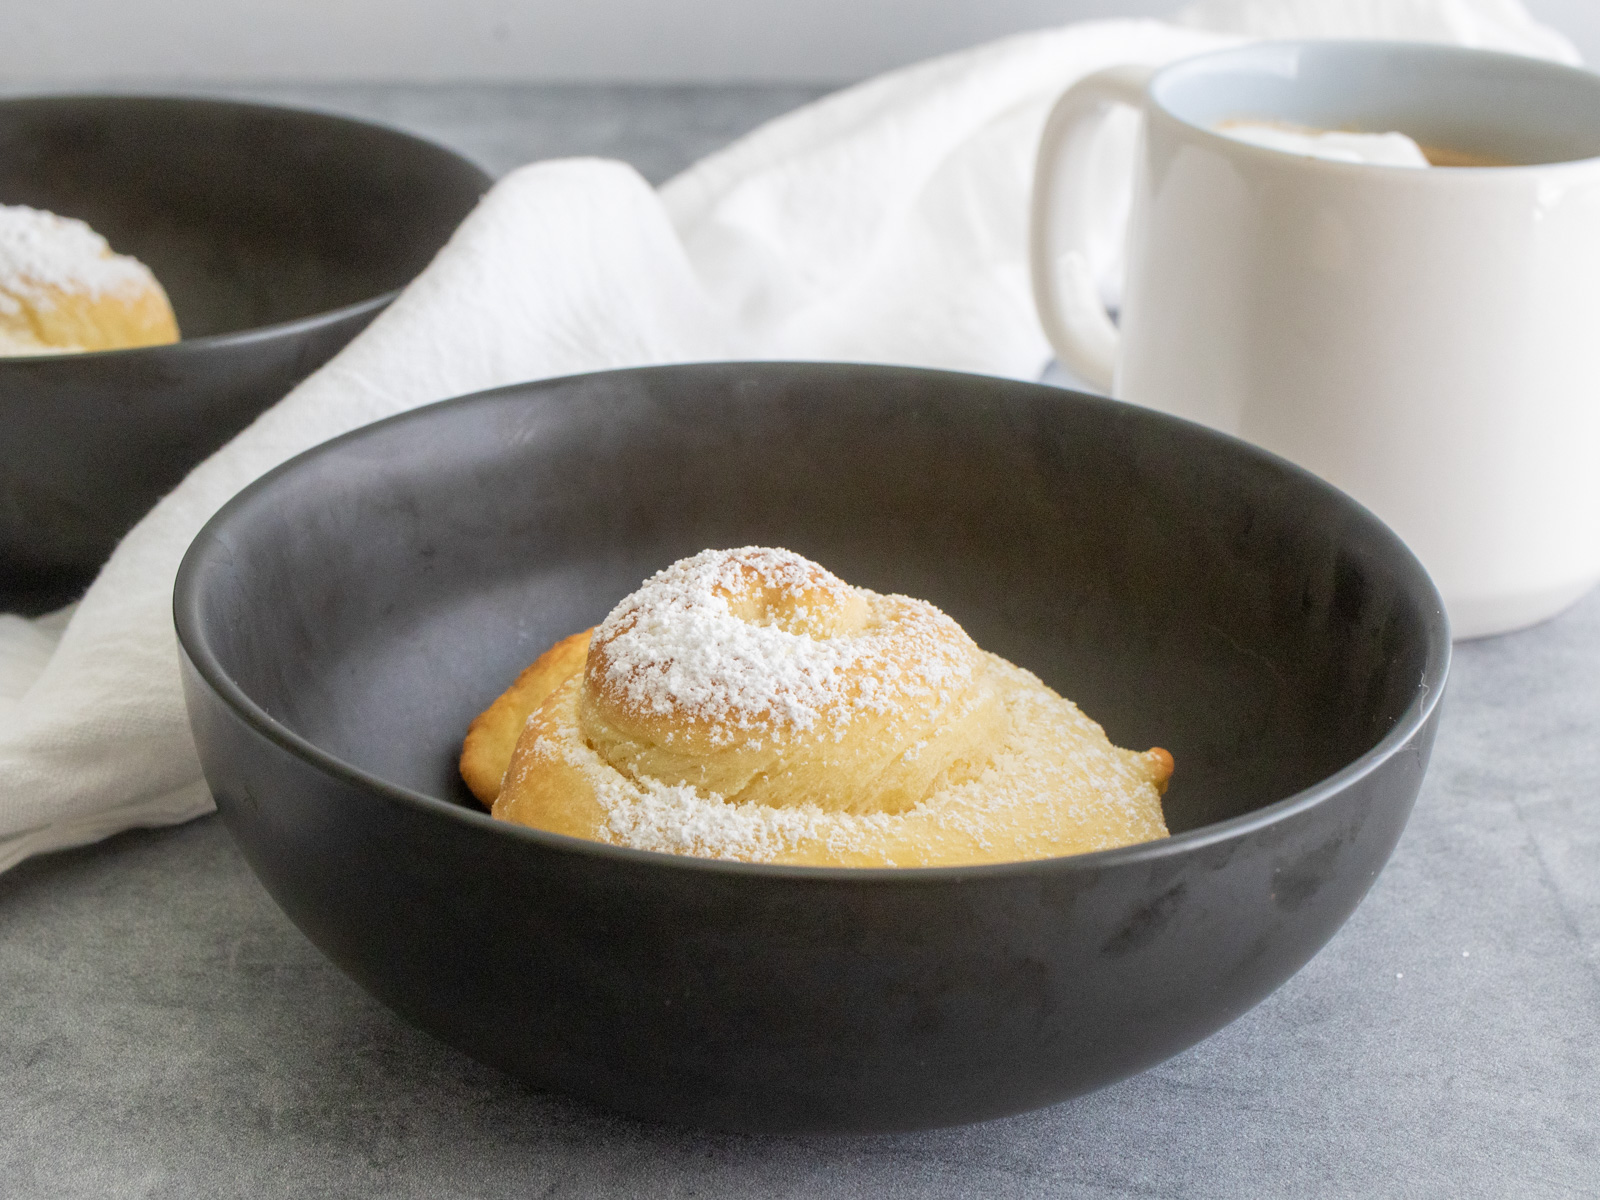 Pan de Mallorca roll in a bowl, with a cup of coffee.